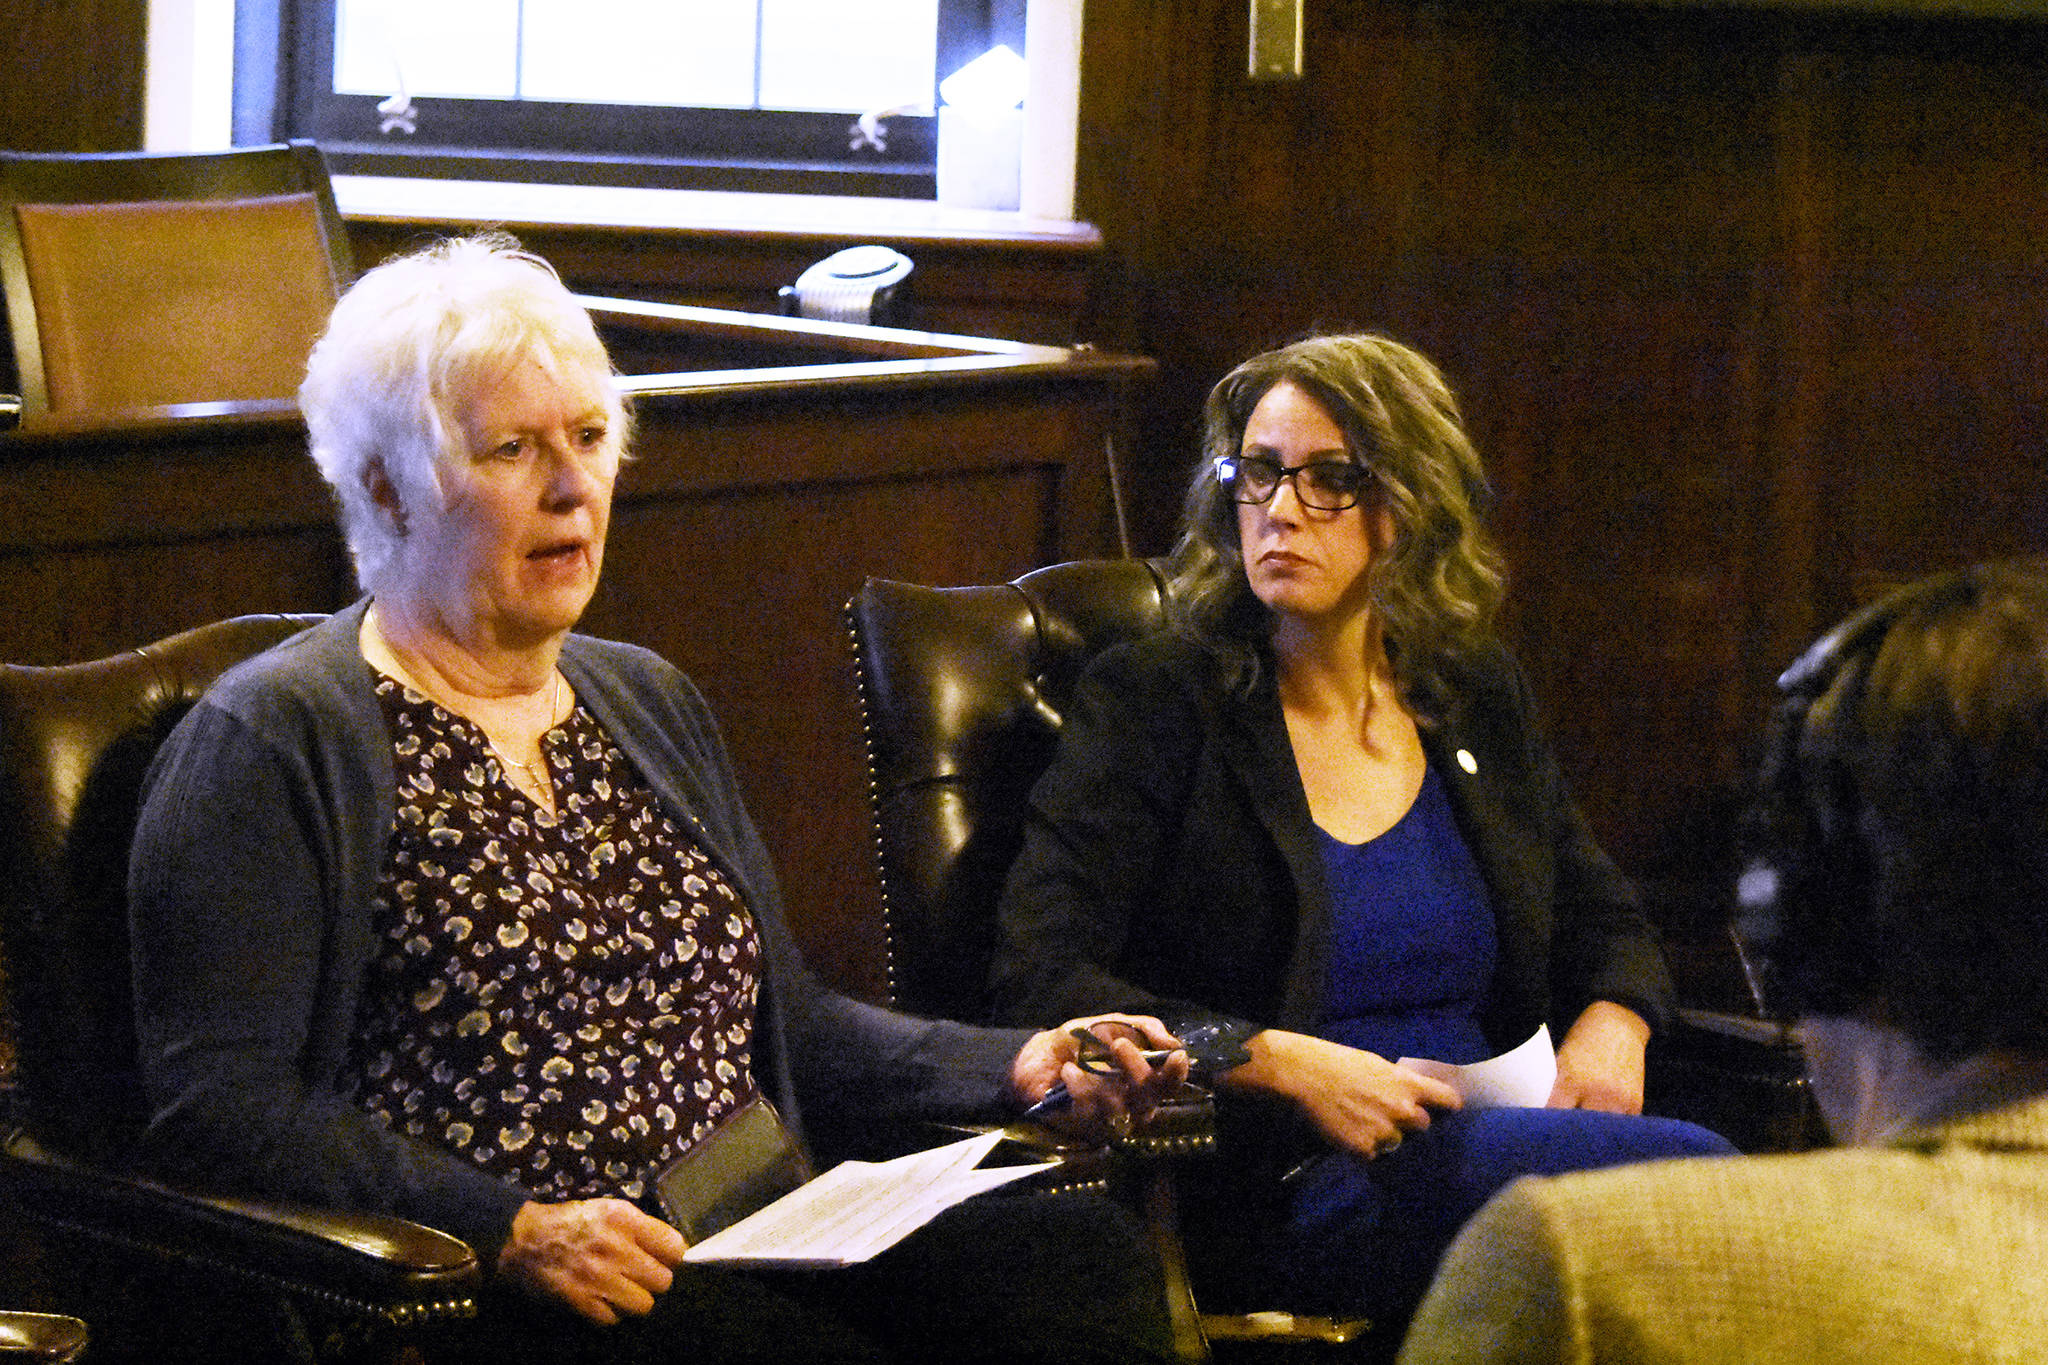 House Speaker Louise Stutes, R-Kodiak, and House Finance Committee co-chair Kelly Merrick, R-Eagle River, meet with reporters on Friday, June 18, 2021 to discuss the legislative deadlock over the budget. Gov. Mike Dunleavy called yet another special session for late June. (Peter Segall / Juneau Empire)